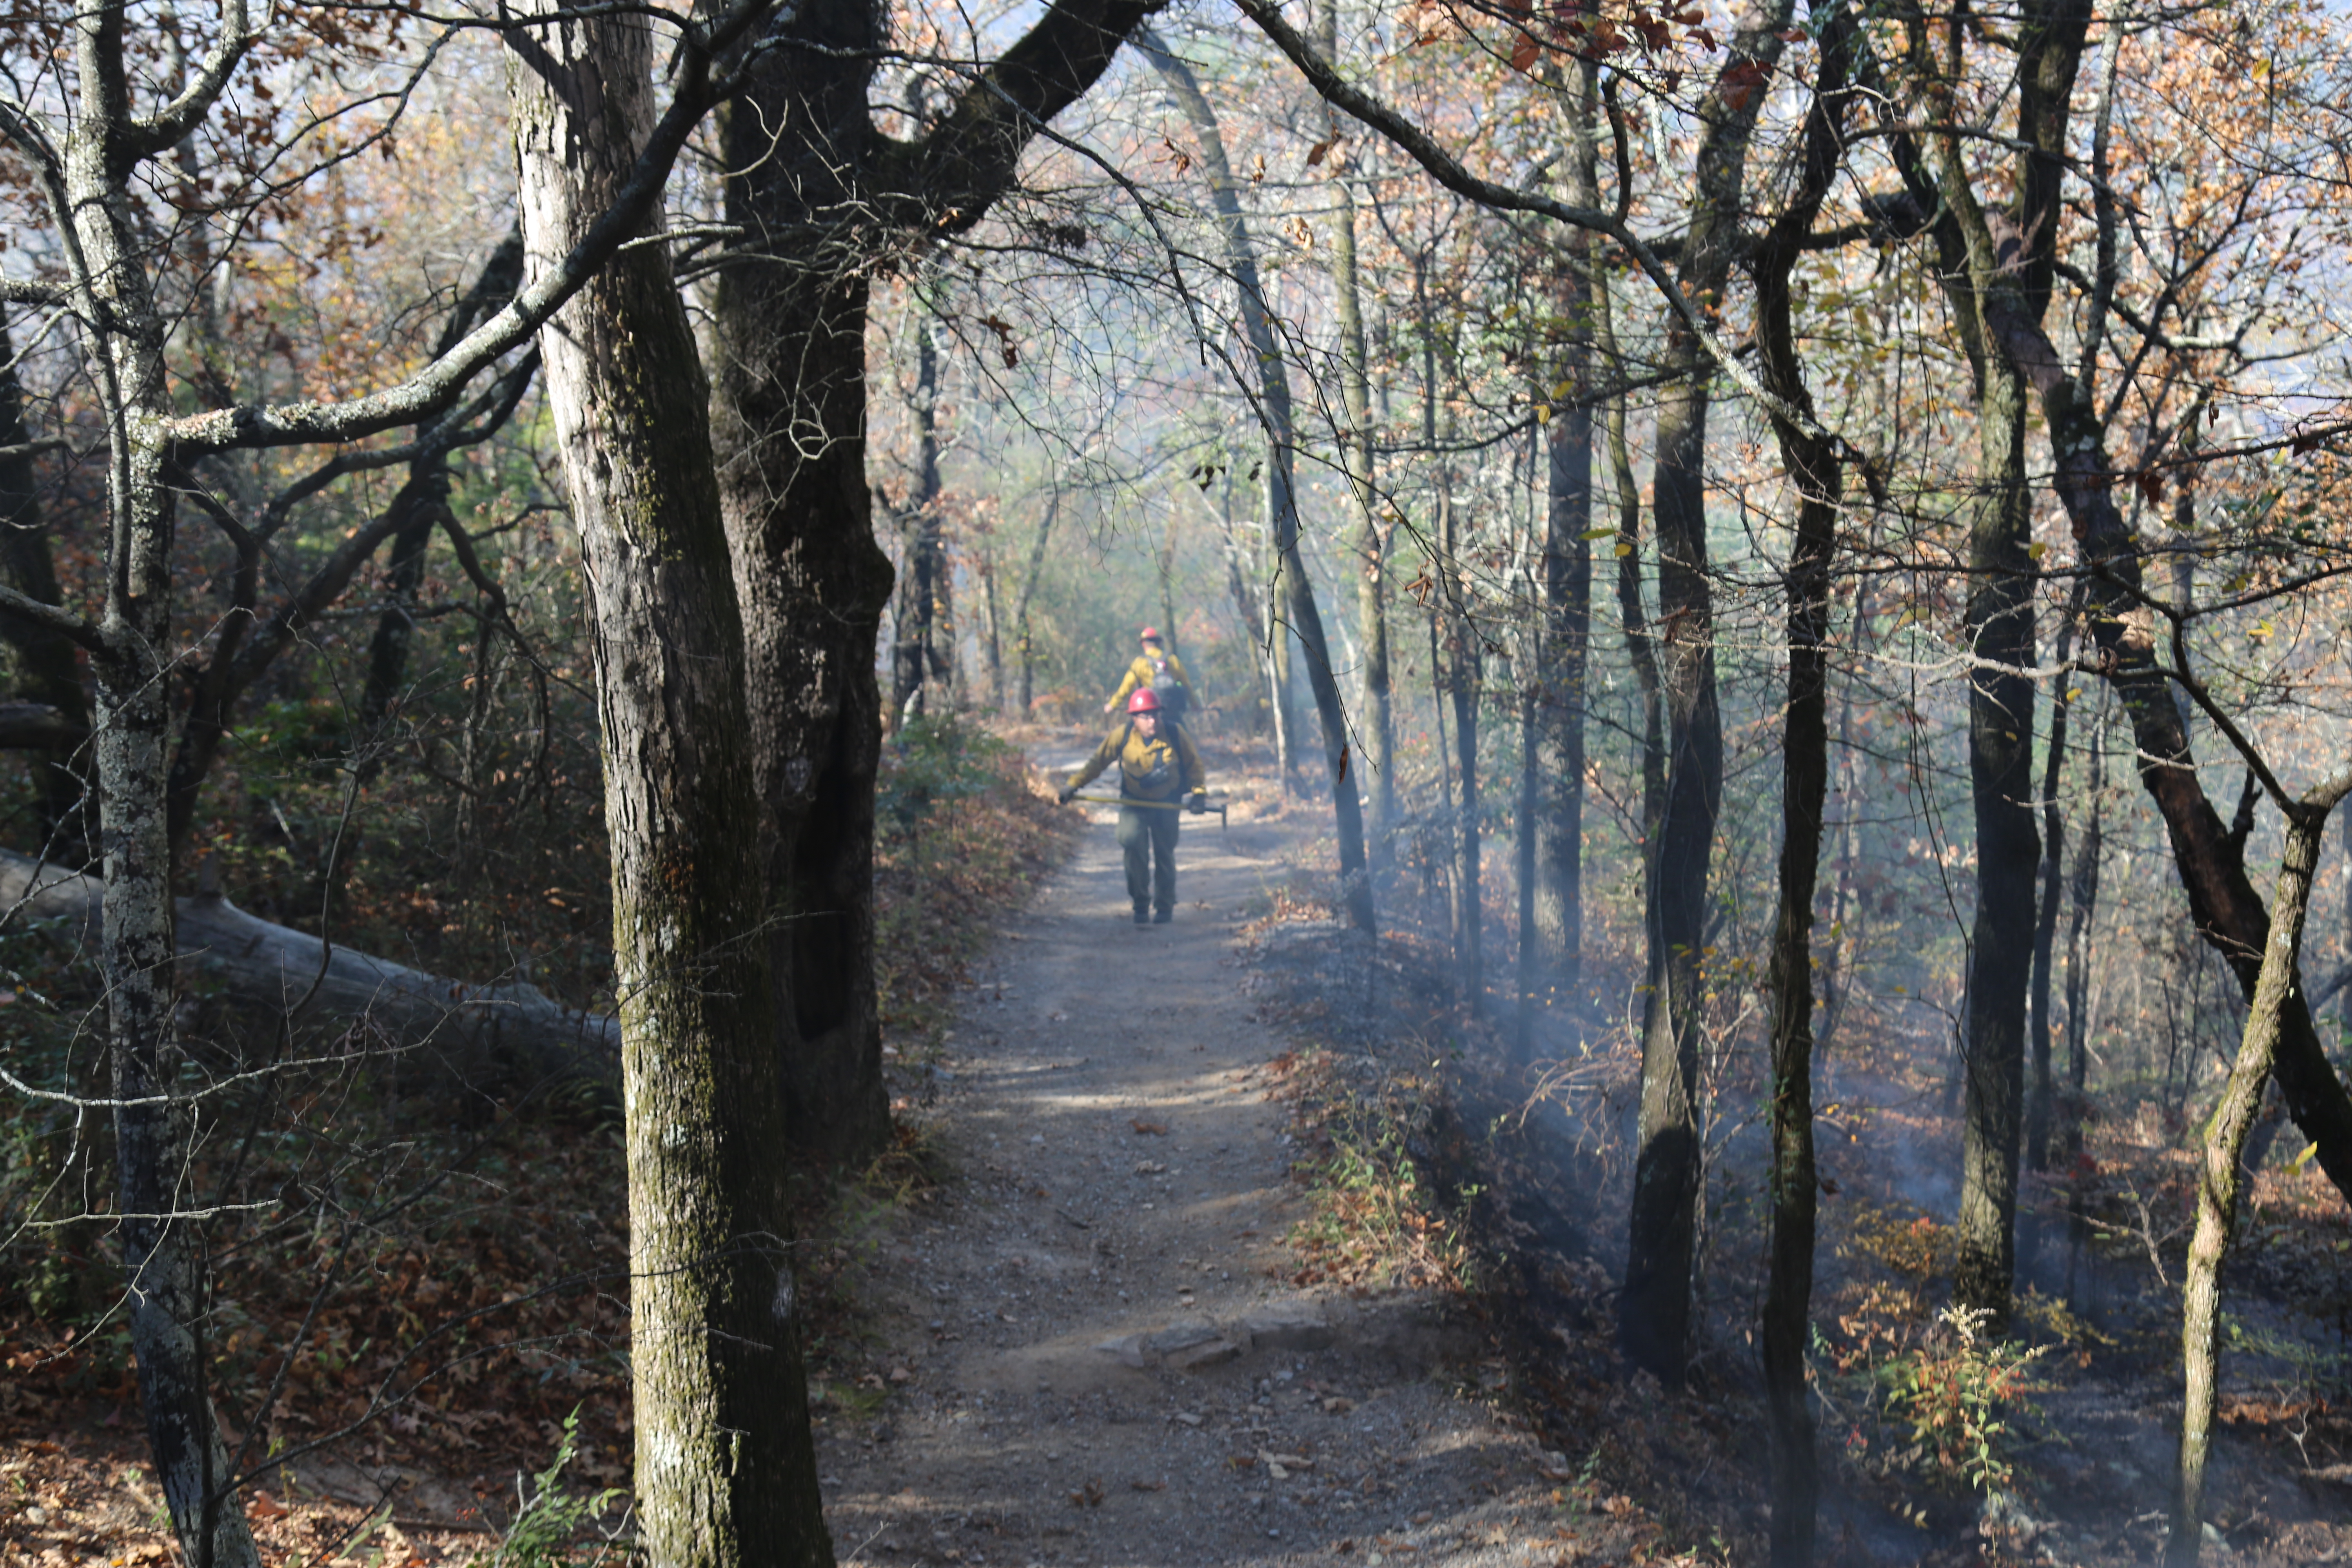 Two people in matching yellow shirts, red hard hats, and green pants walk in opposite directions on a smoky forested trail.